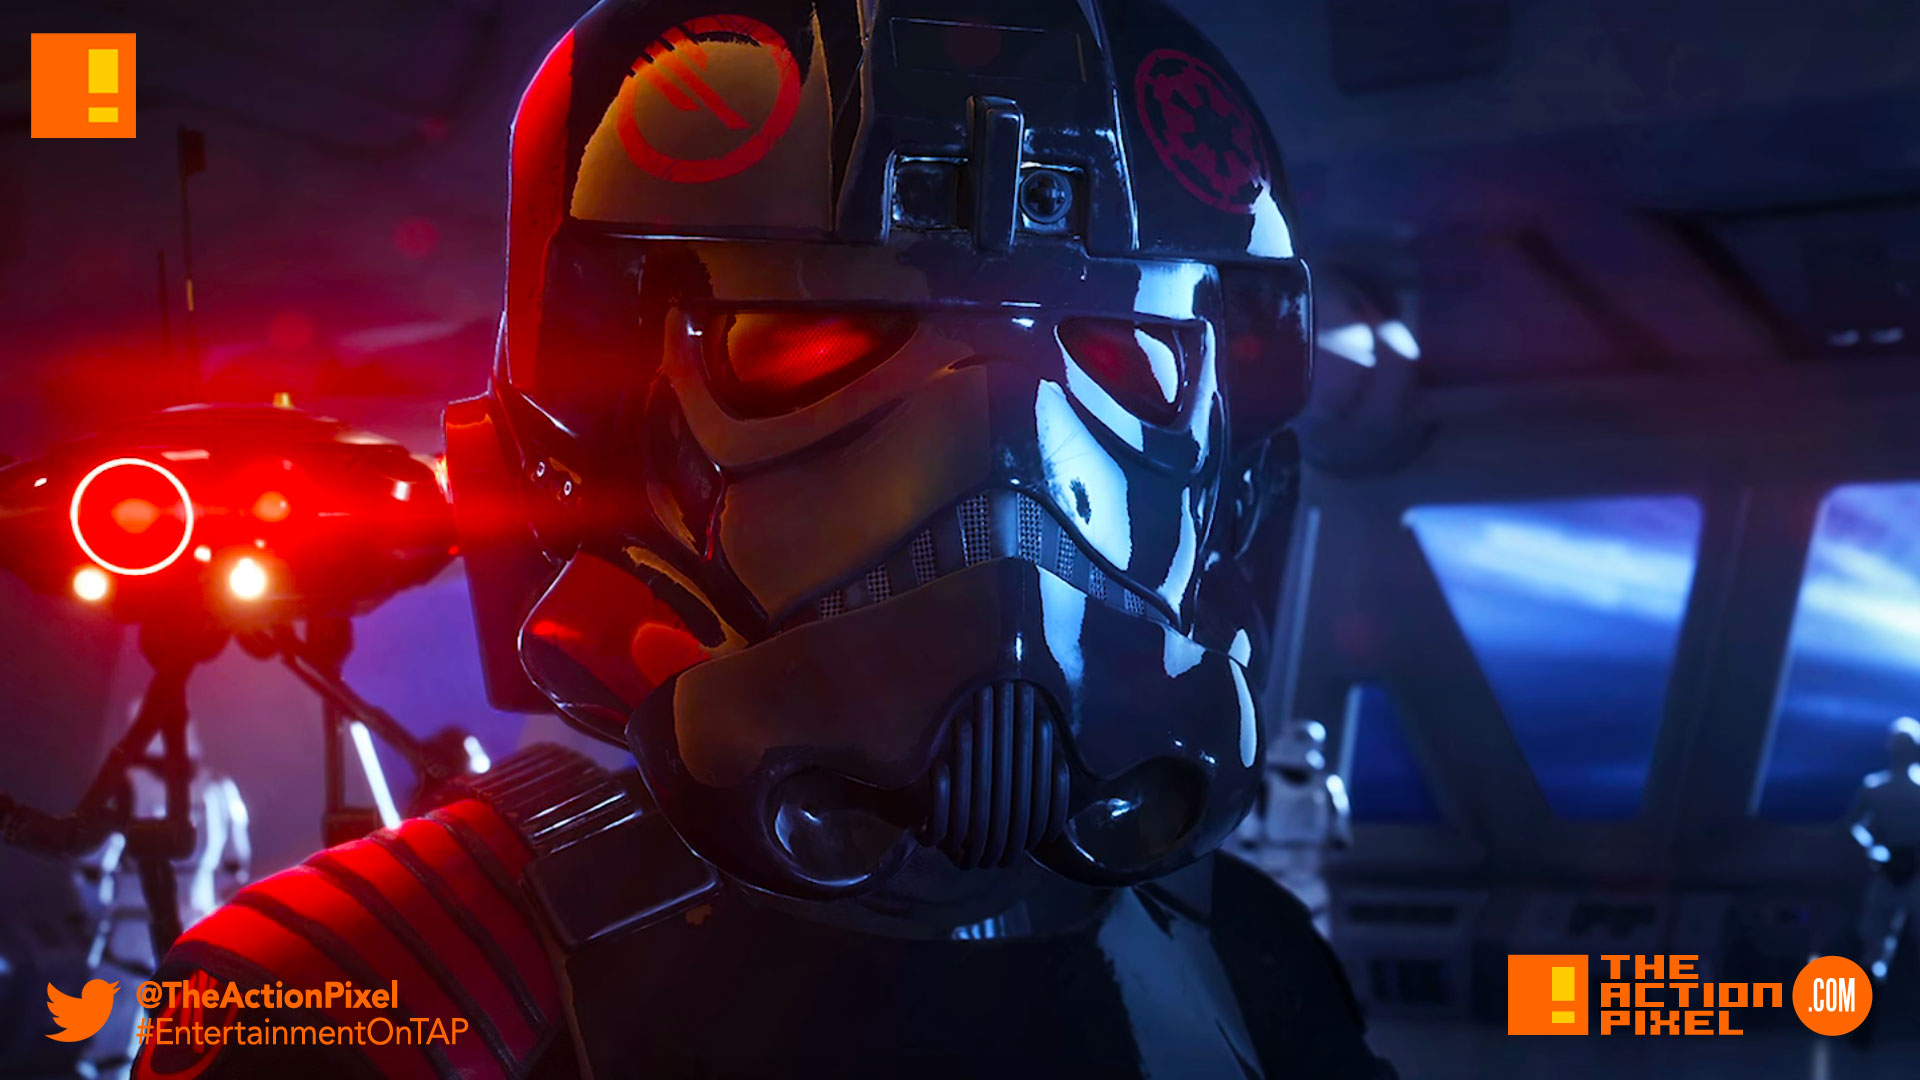 star wars, star wars: battlefront ii, star wars battlefront II, BATTLEFRONT II, battlefront 2, kylo ren, trailer, ea, dice games, ea dice, the action pixel, entertainment on tap,behind the story, bts,